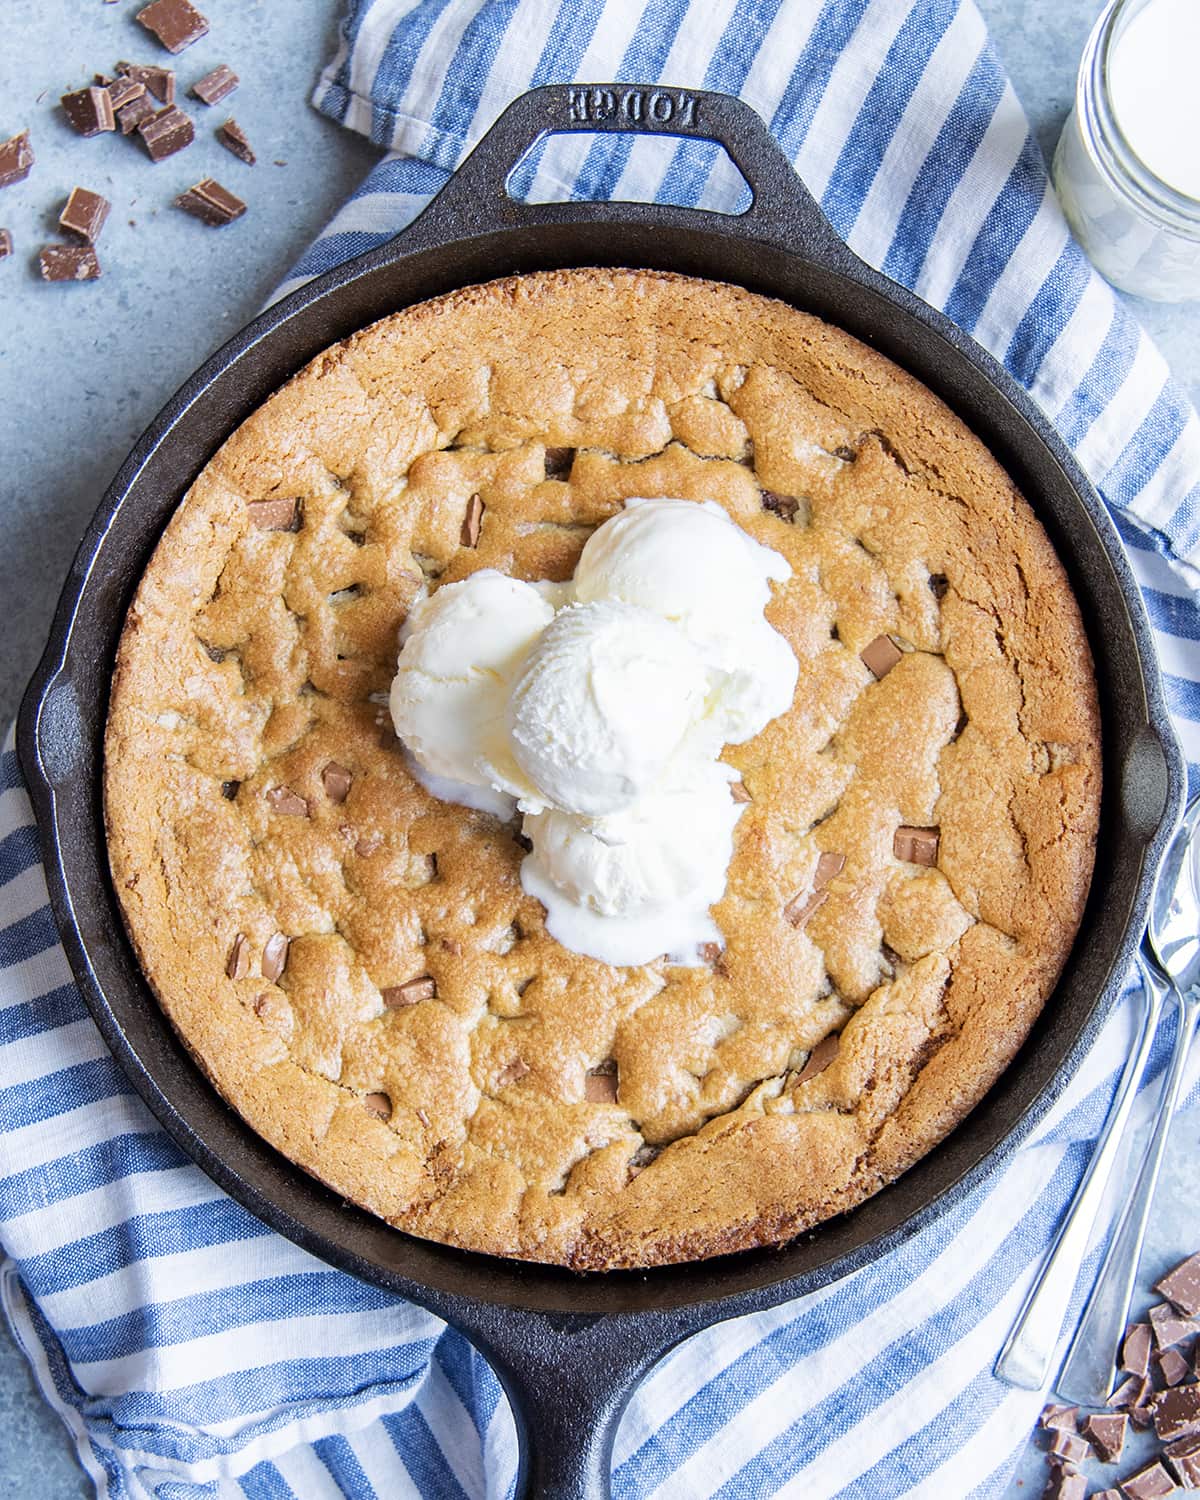 A chocolate chunk pizookie topped with scoops of vanilla ice cream.